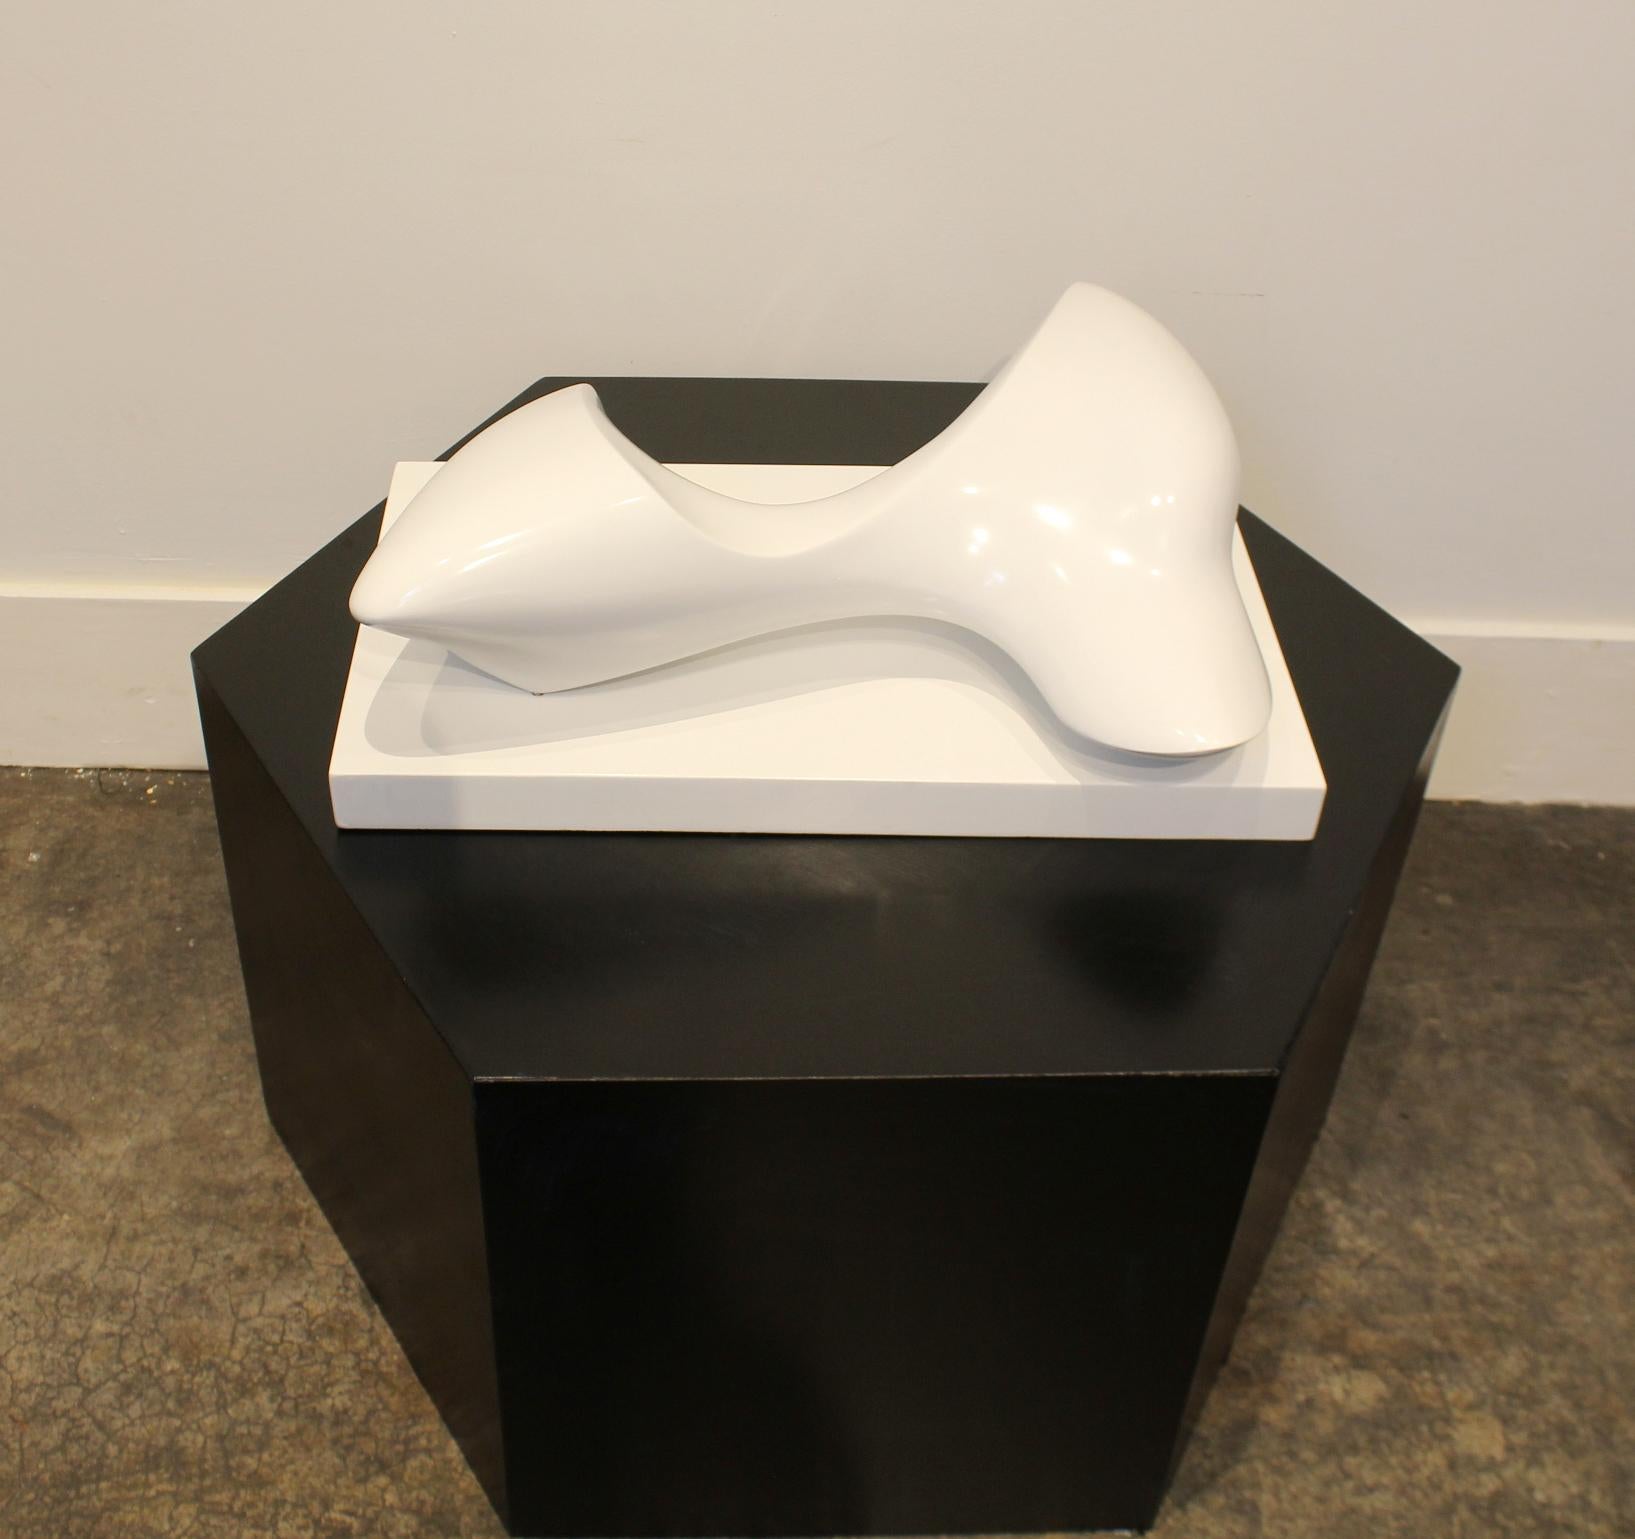 Ultramodern fiber-glass sculpture by David Anderson, signed and dated 1/13, 1978.

David Anderson (1931-2006) was a leading three-dimensional abstract artist known for his work in fiberglass and epoxy resin, as well as woods and bronze. Born in